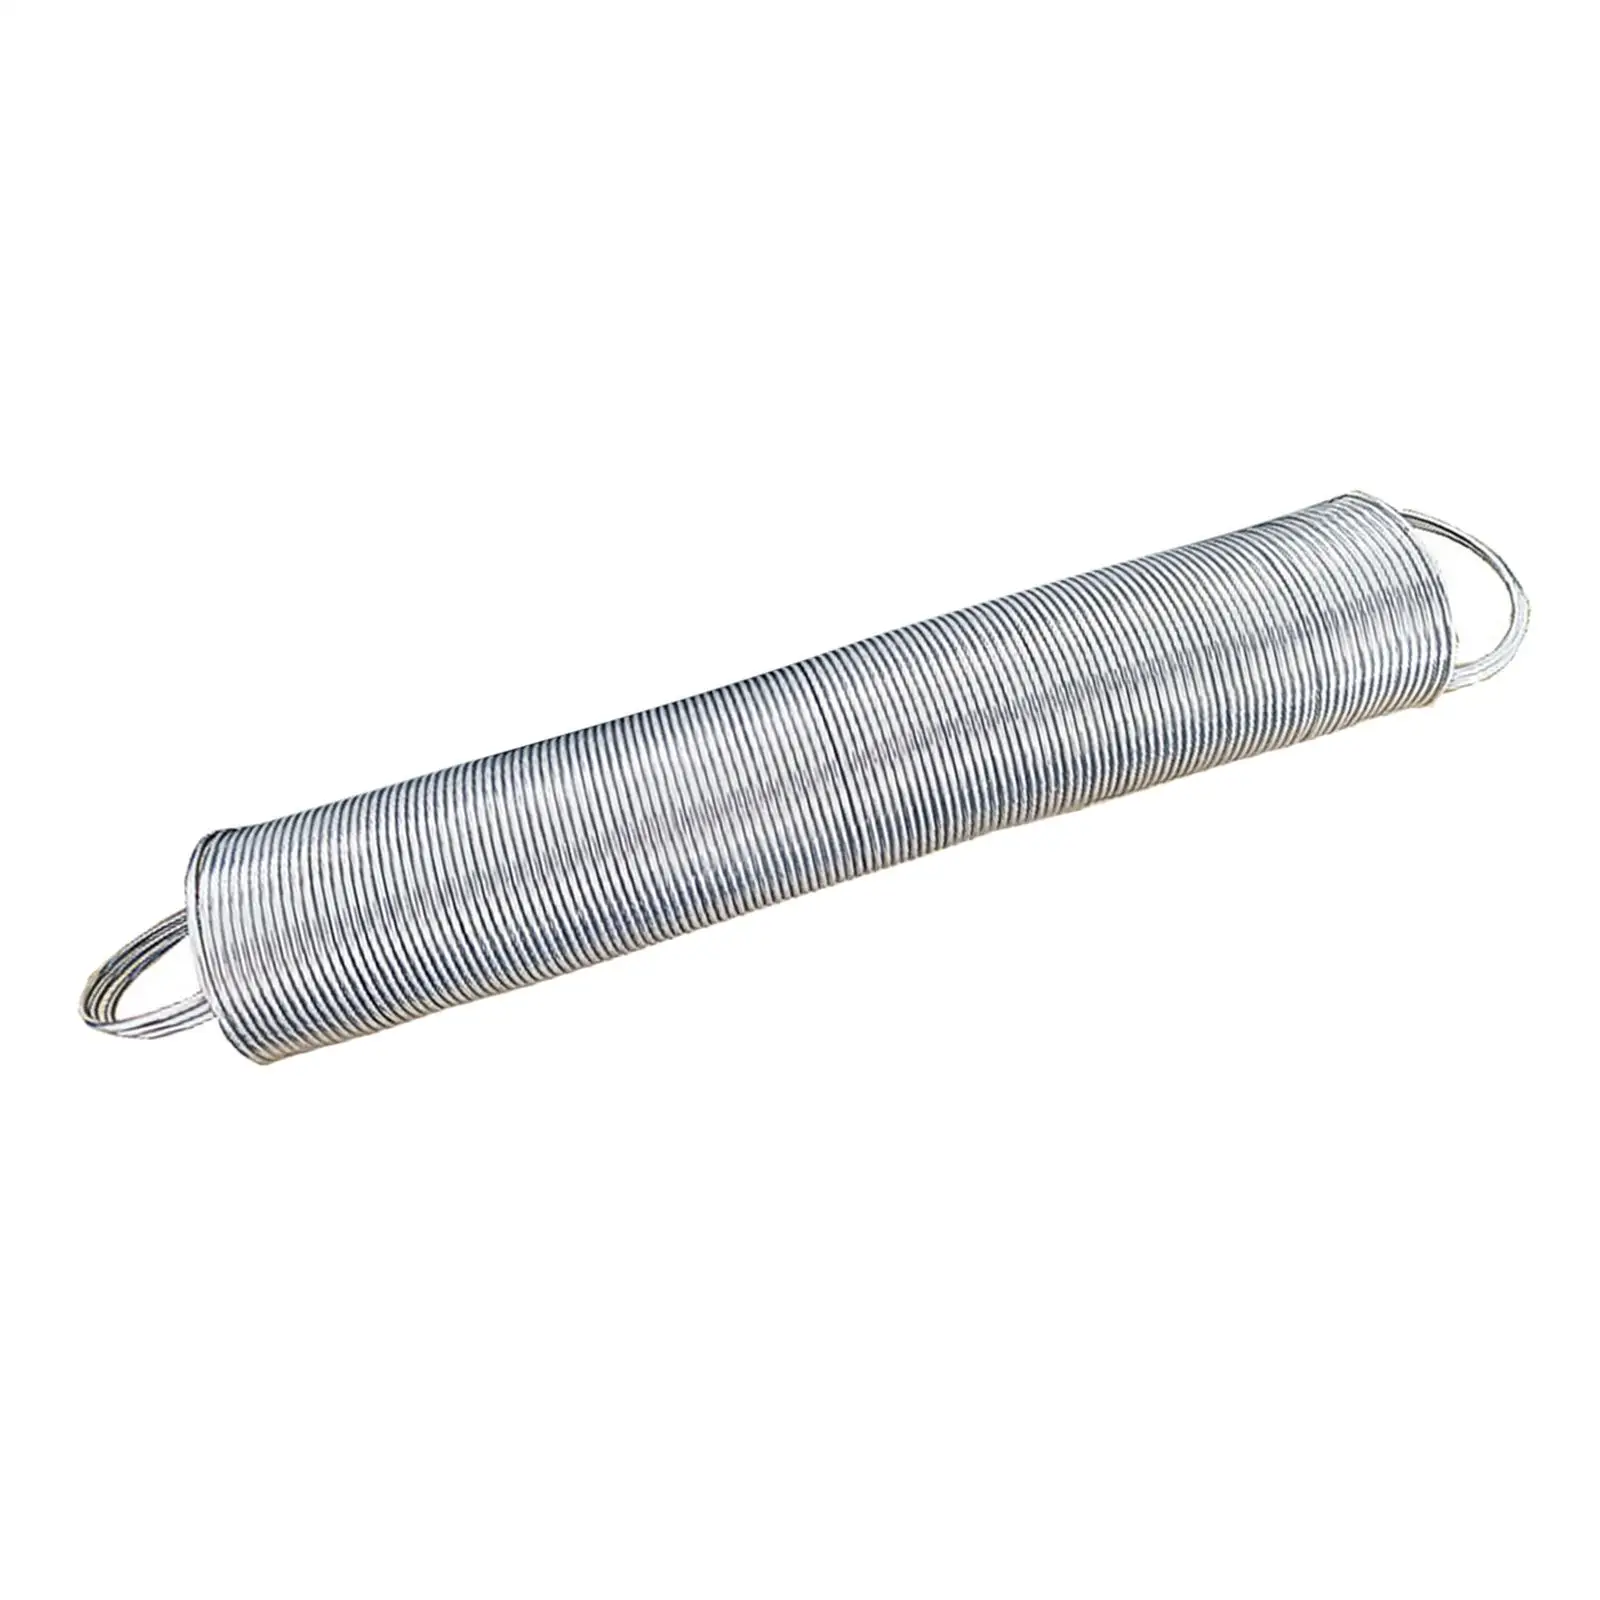 Electric Fence Retractable Spring Gate Handle Tension Spring for Livestock Fencing Supplies Preventing Animals Intruding